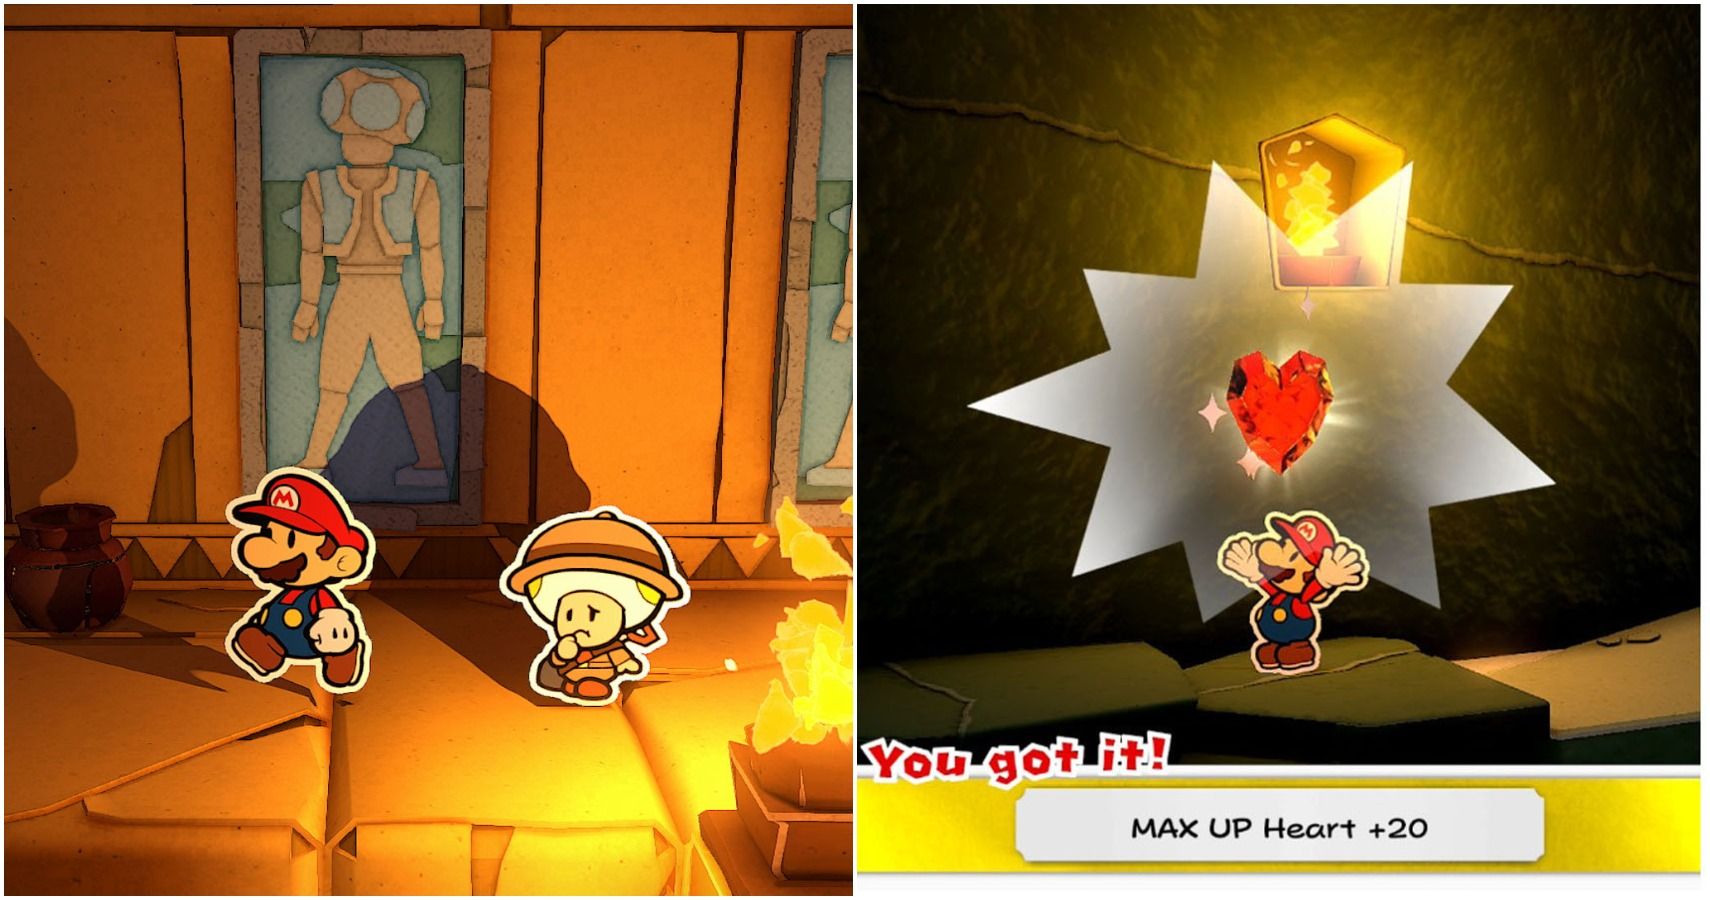 Paper Mario: The Origami King: 15 Things To Do After You Beat The Game